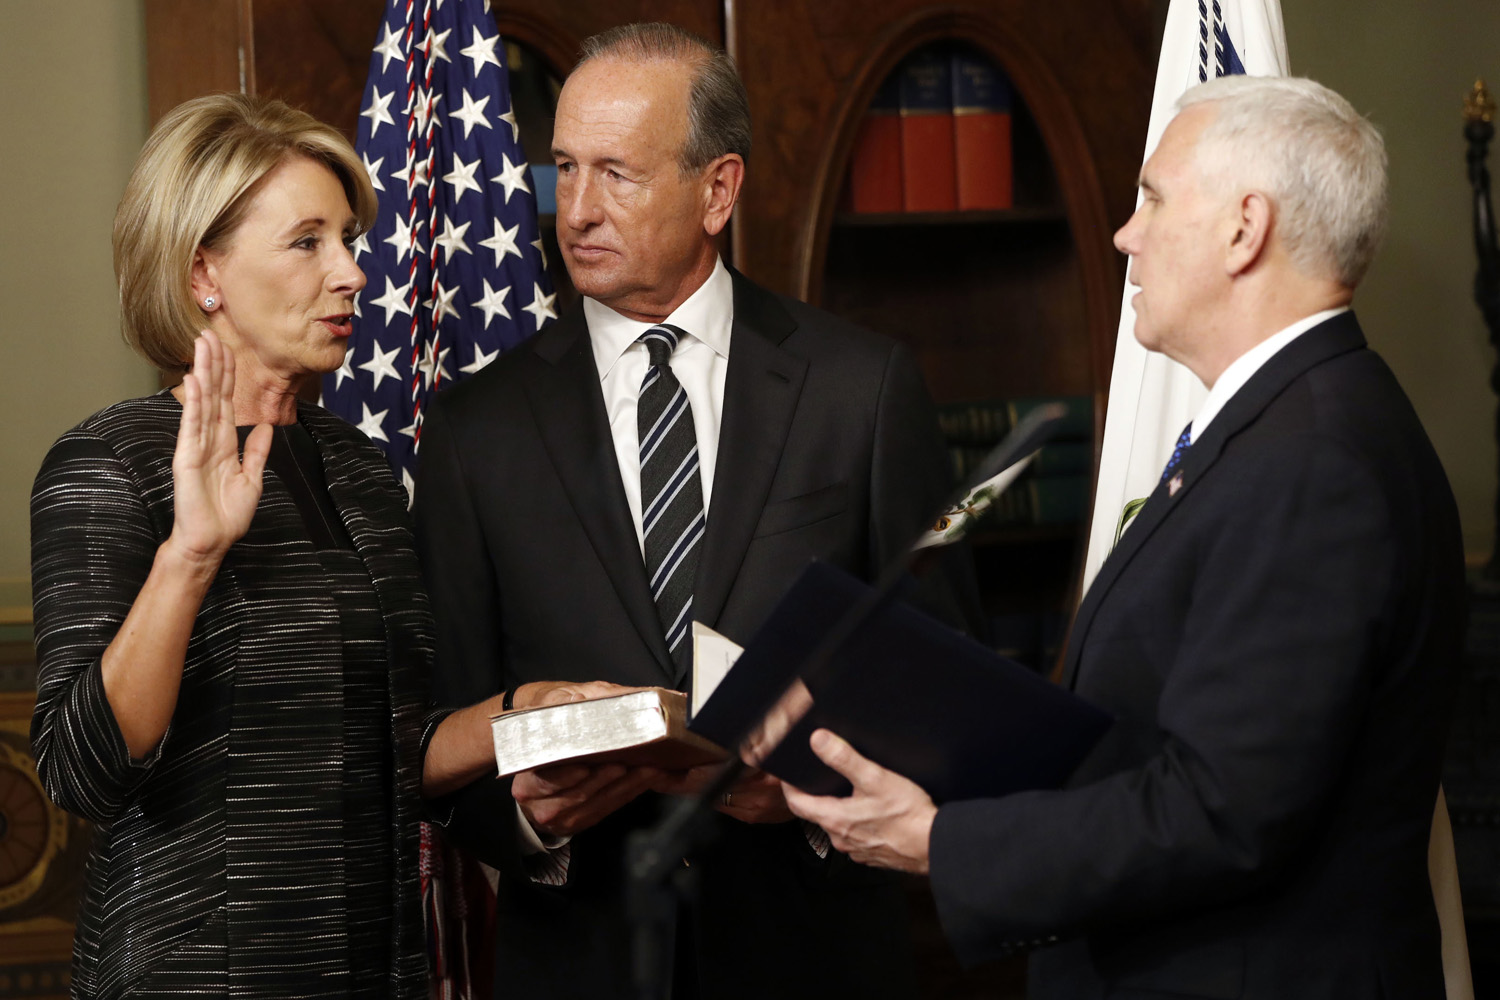 Vice President Mike Pence swears in Education Secretary Betsy DeVos in the Eisenhower Executive Office Building in the White House complex in Washington, Tuesday, Feb. 7, 2016, as DeVos' husband Dick DeVos watches. (AP Photo/Pablo Martinez Monsivais)